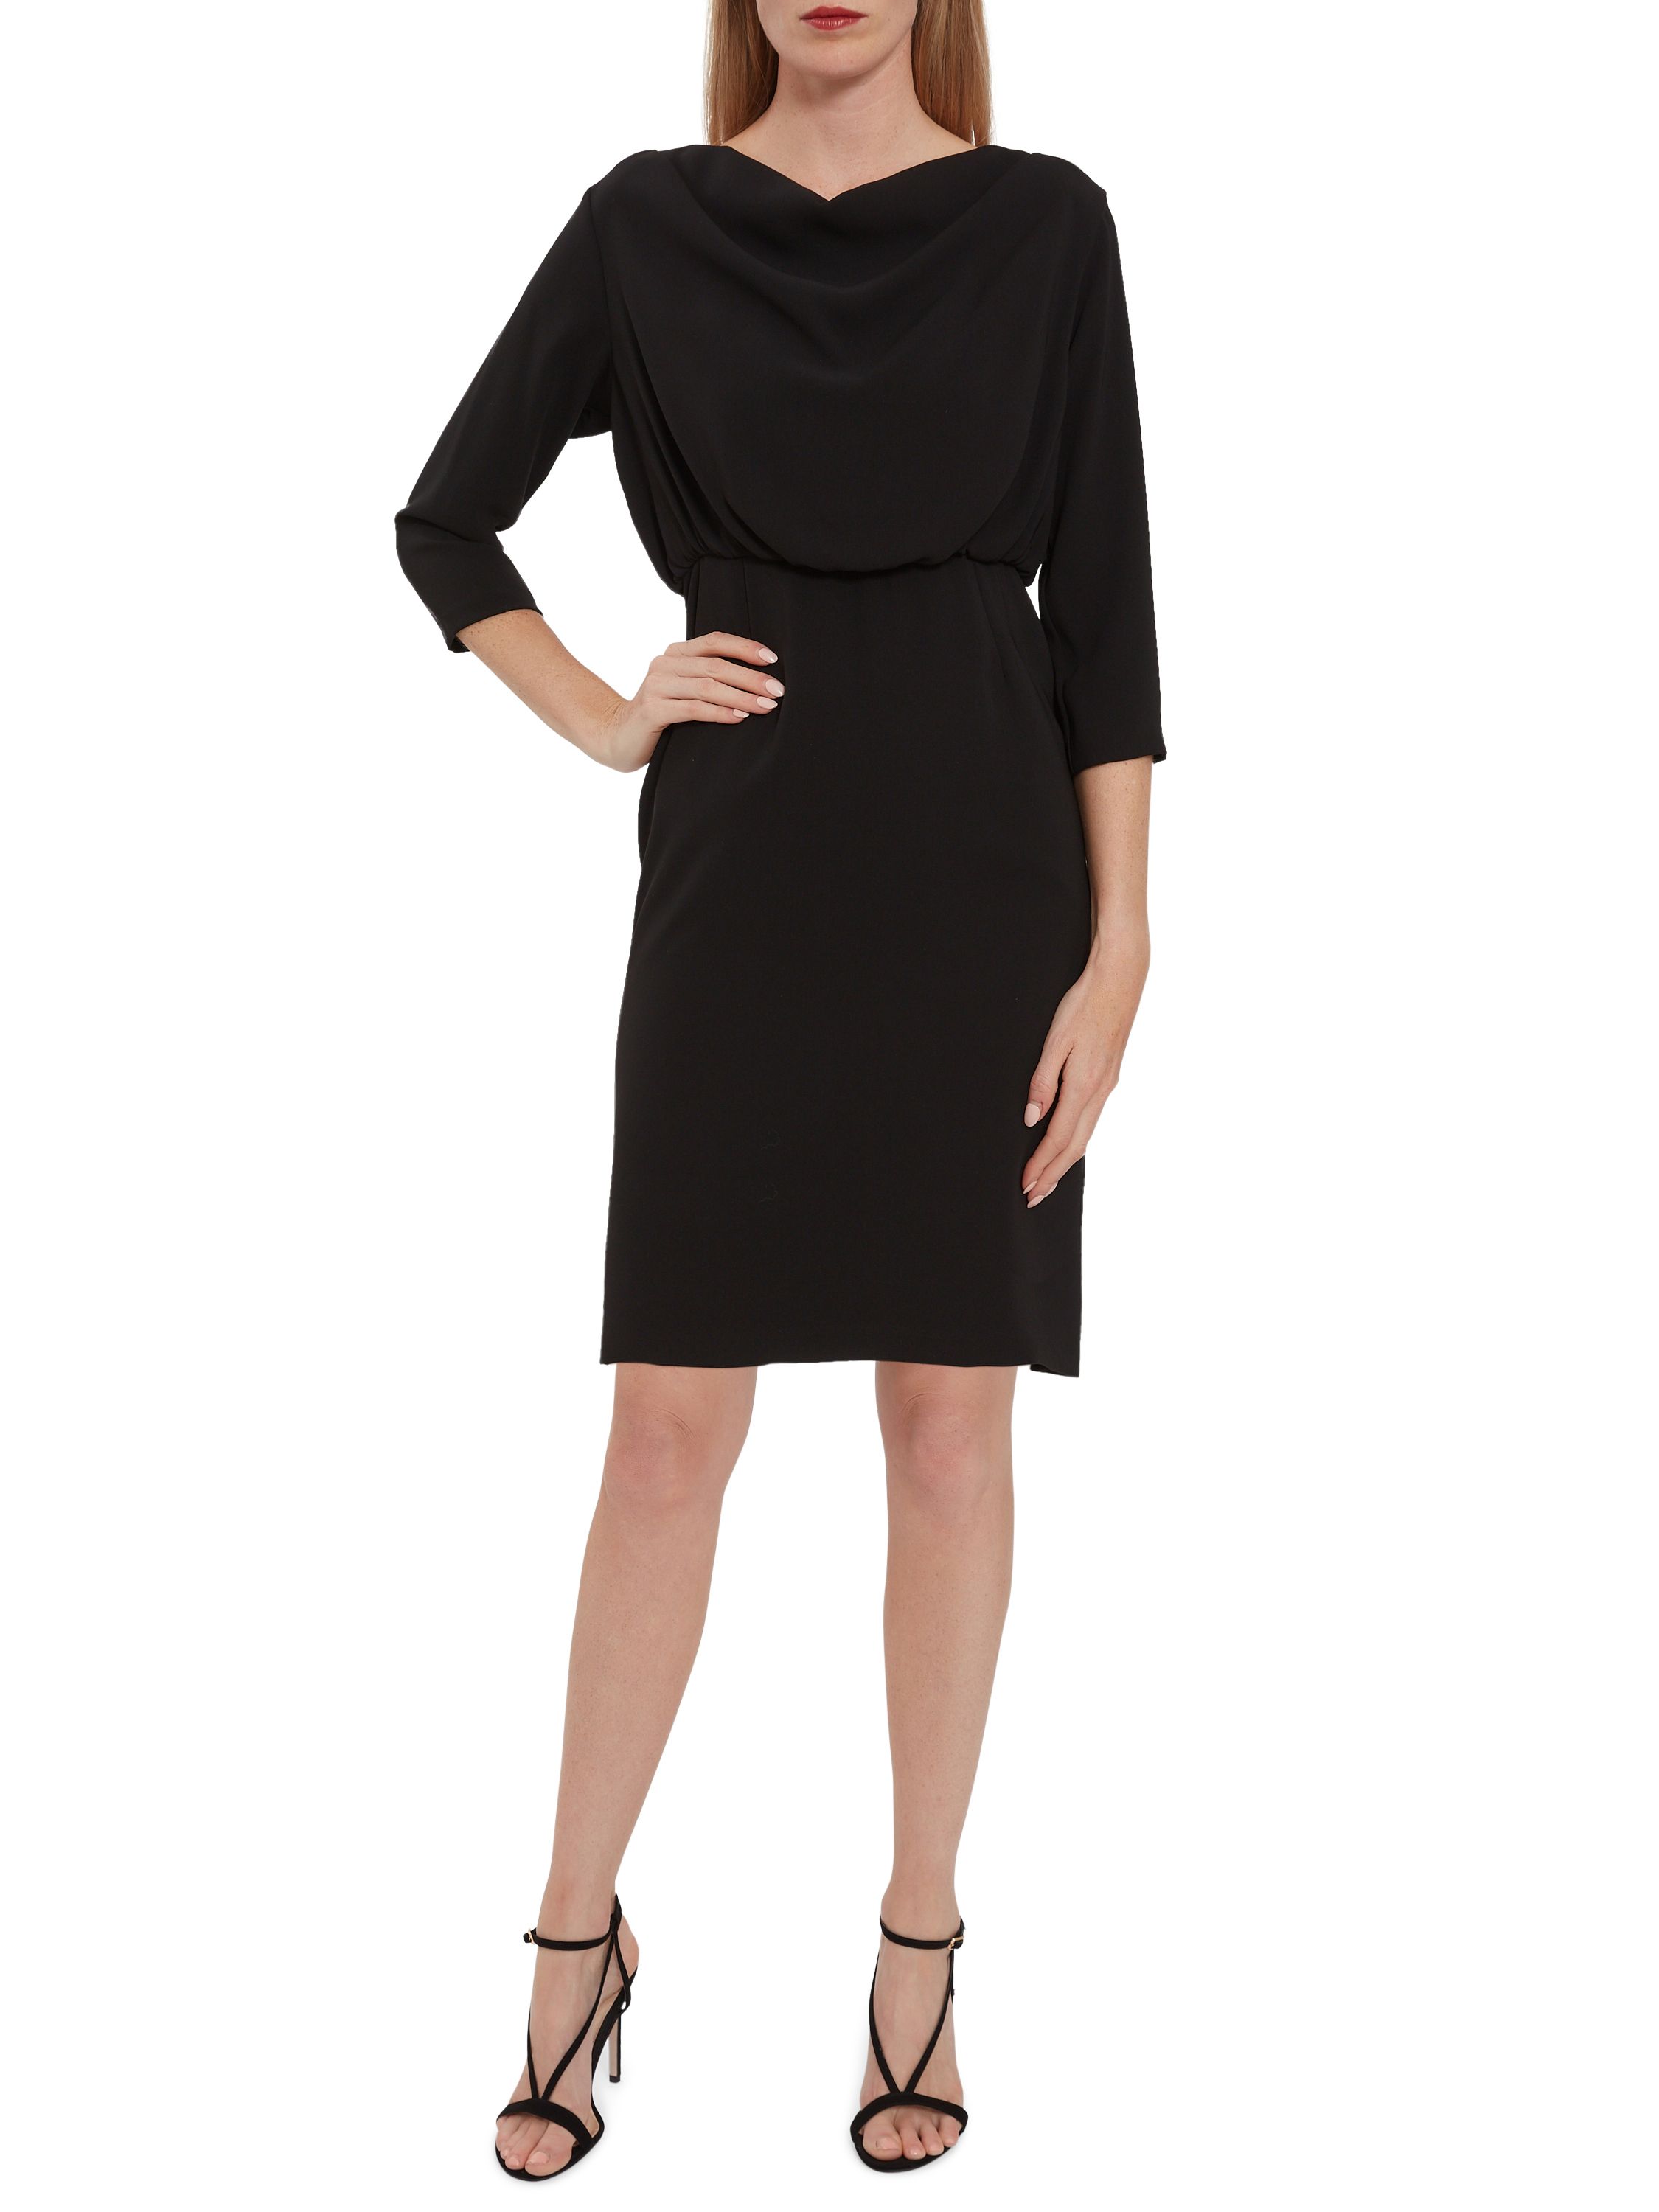 Feel fabulous in this soft crepe dress by Gina Bacconi. It has 1/2 length sleeves and delicate ruching at the waistline with cowl neck detailing for an elegant finish. The dress is fully lined.